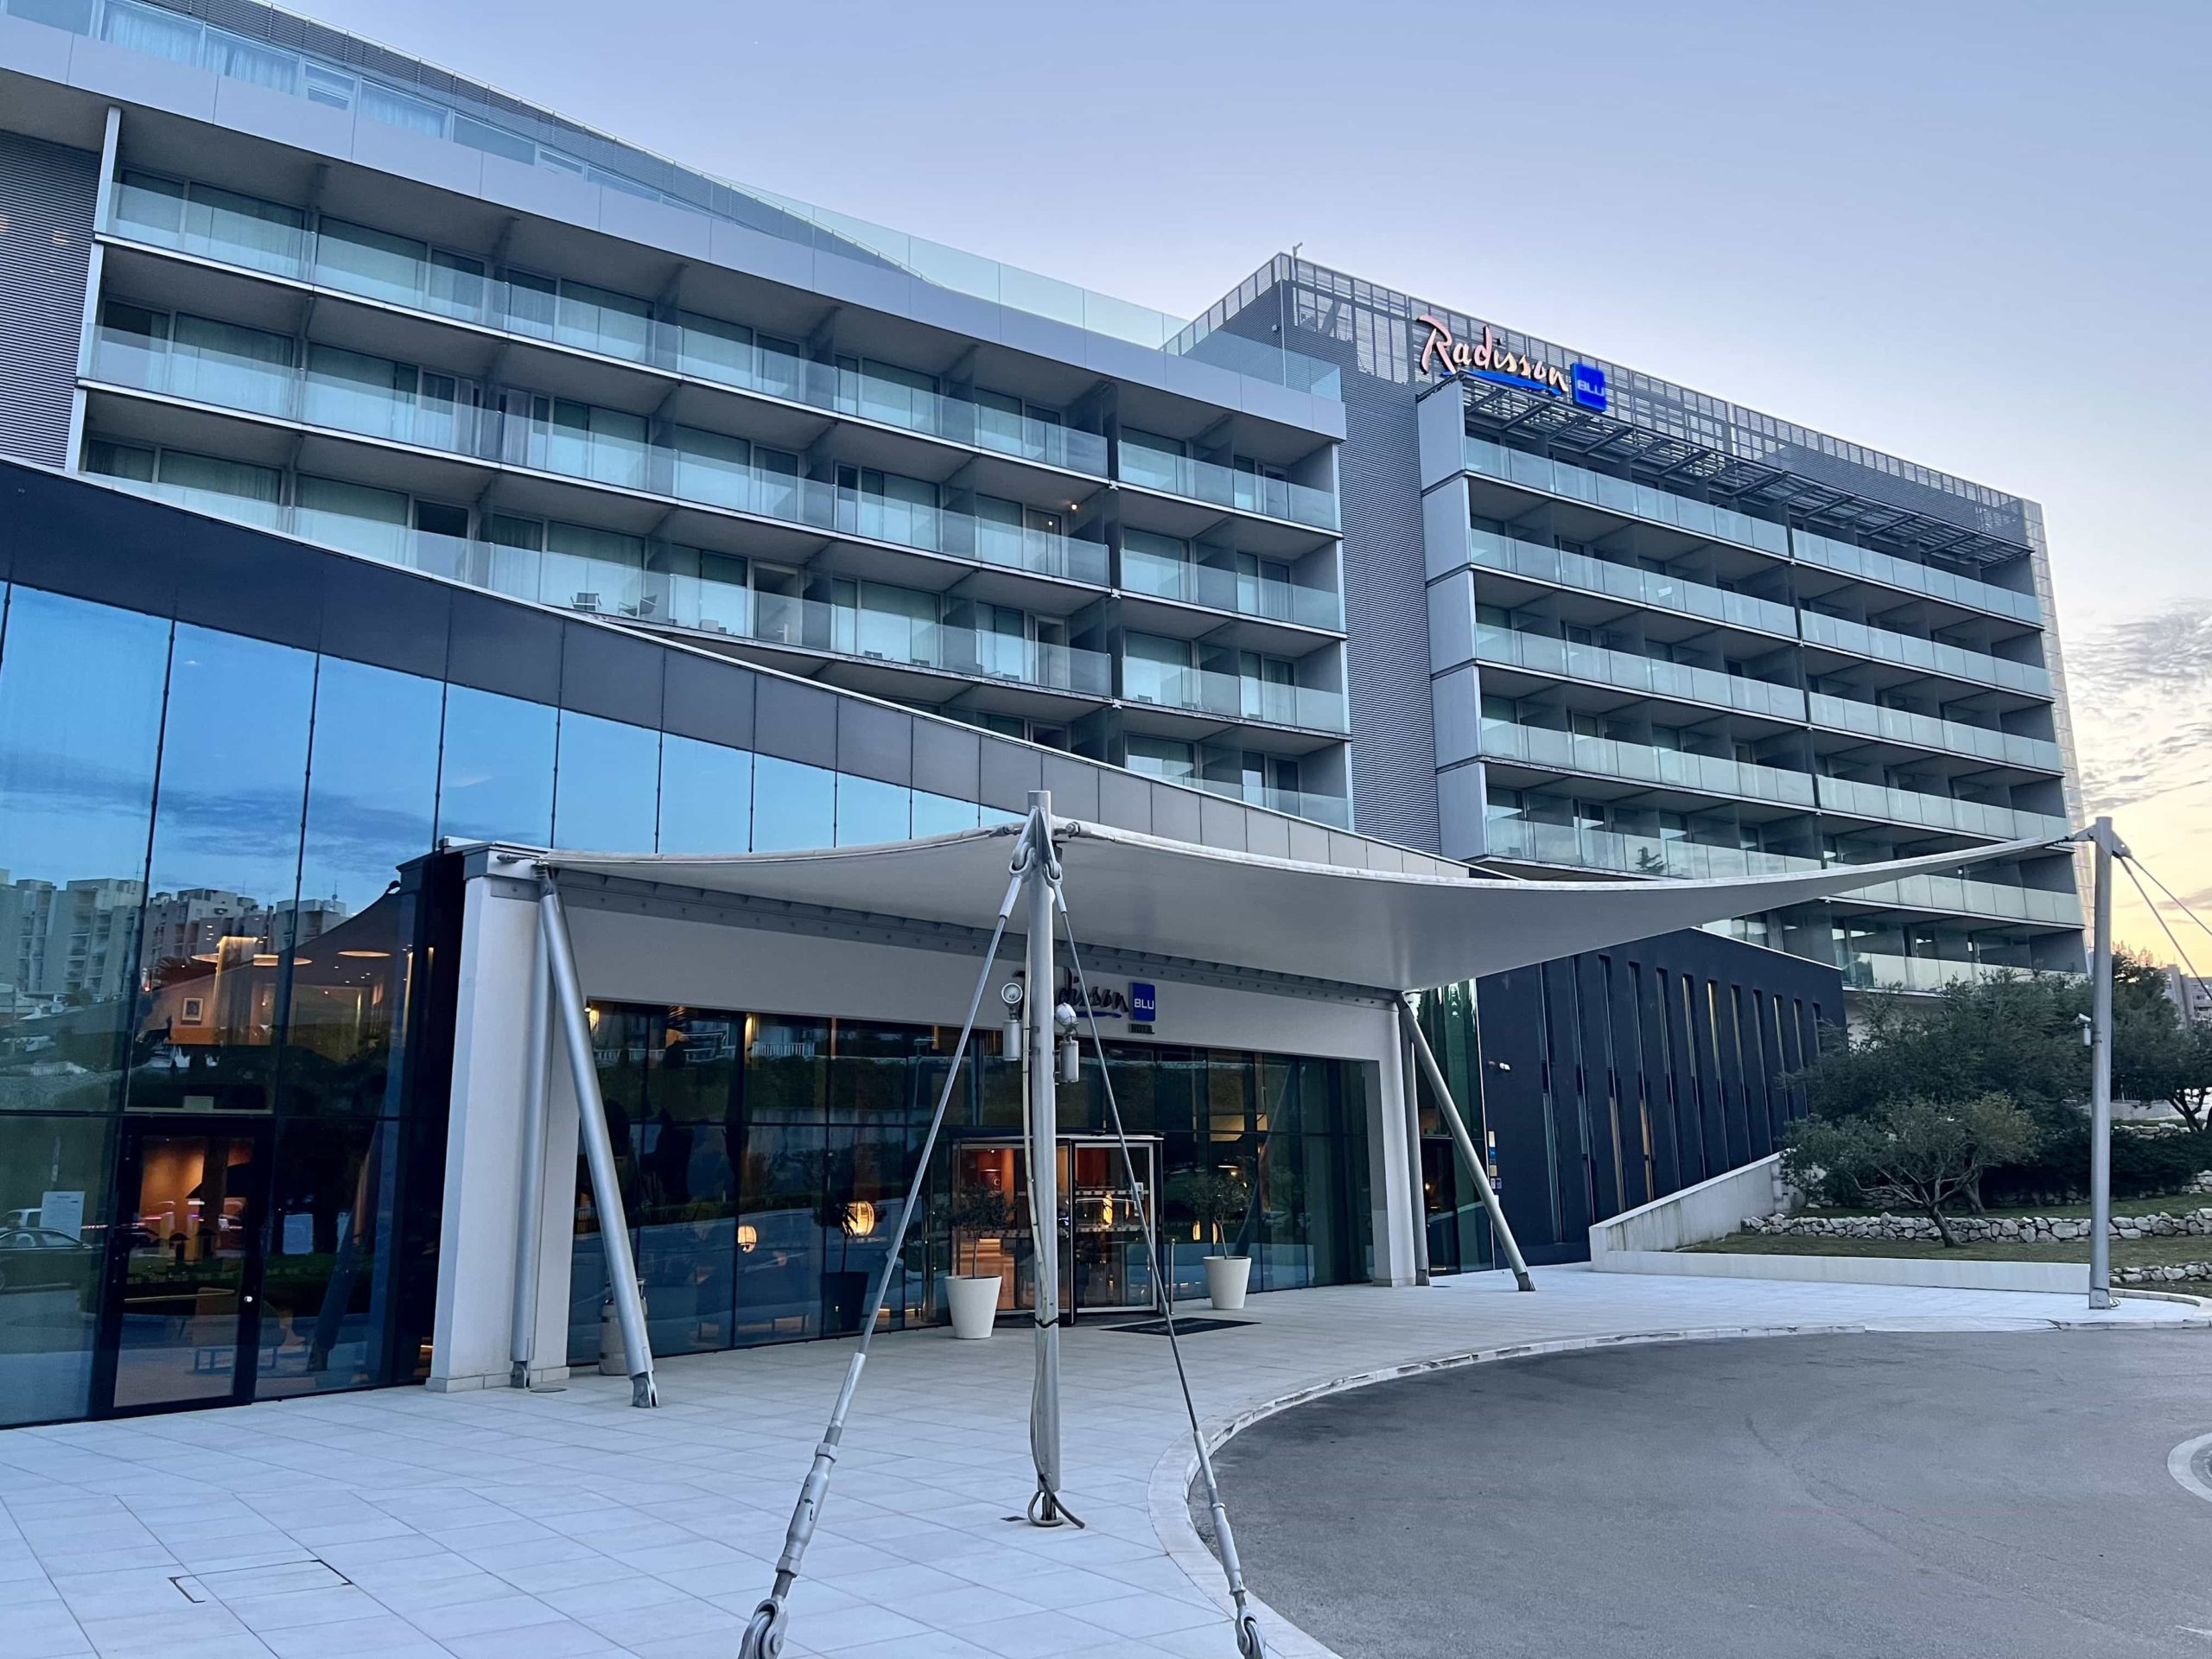 The exterior and entrance of the Radisson Blu Resort & Spa, Split